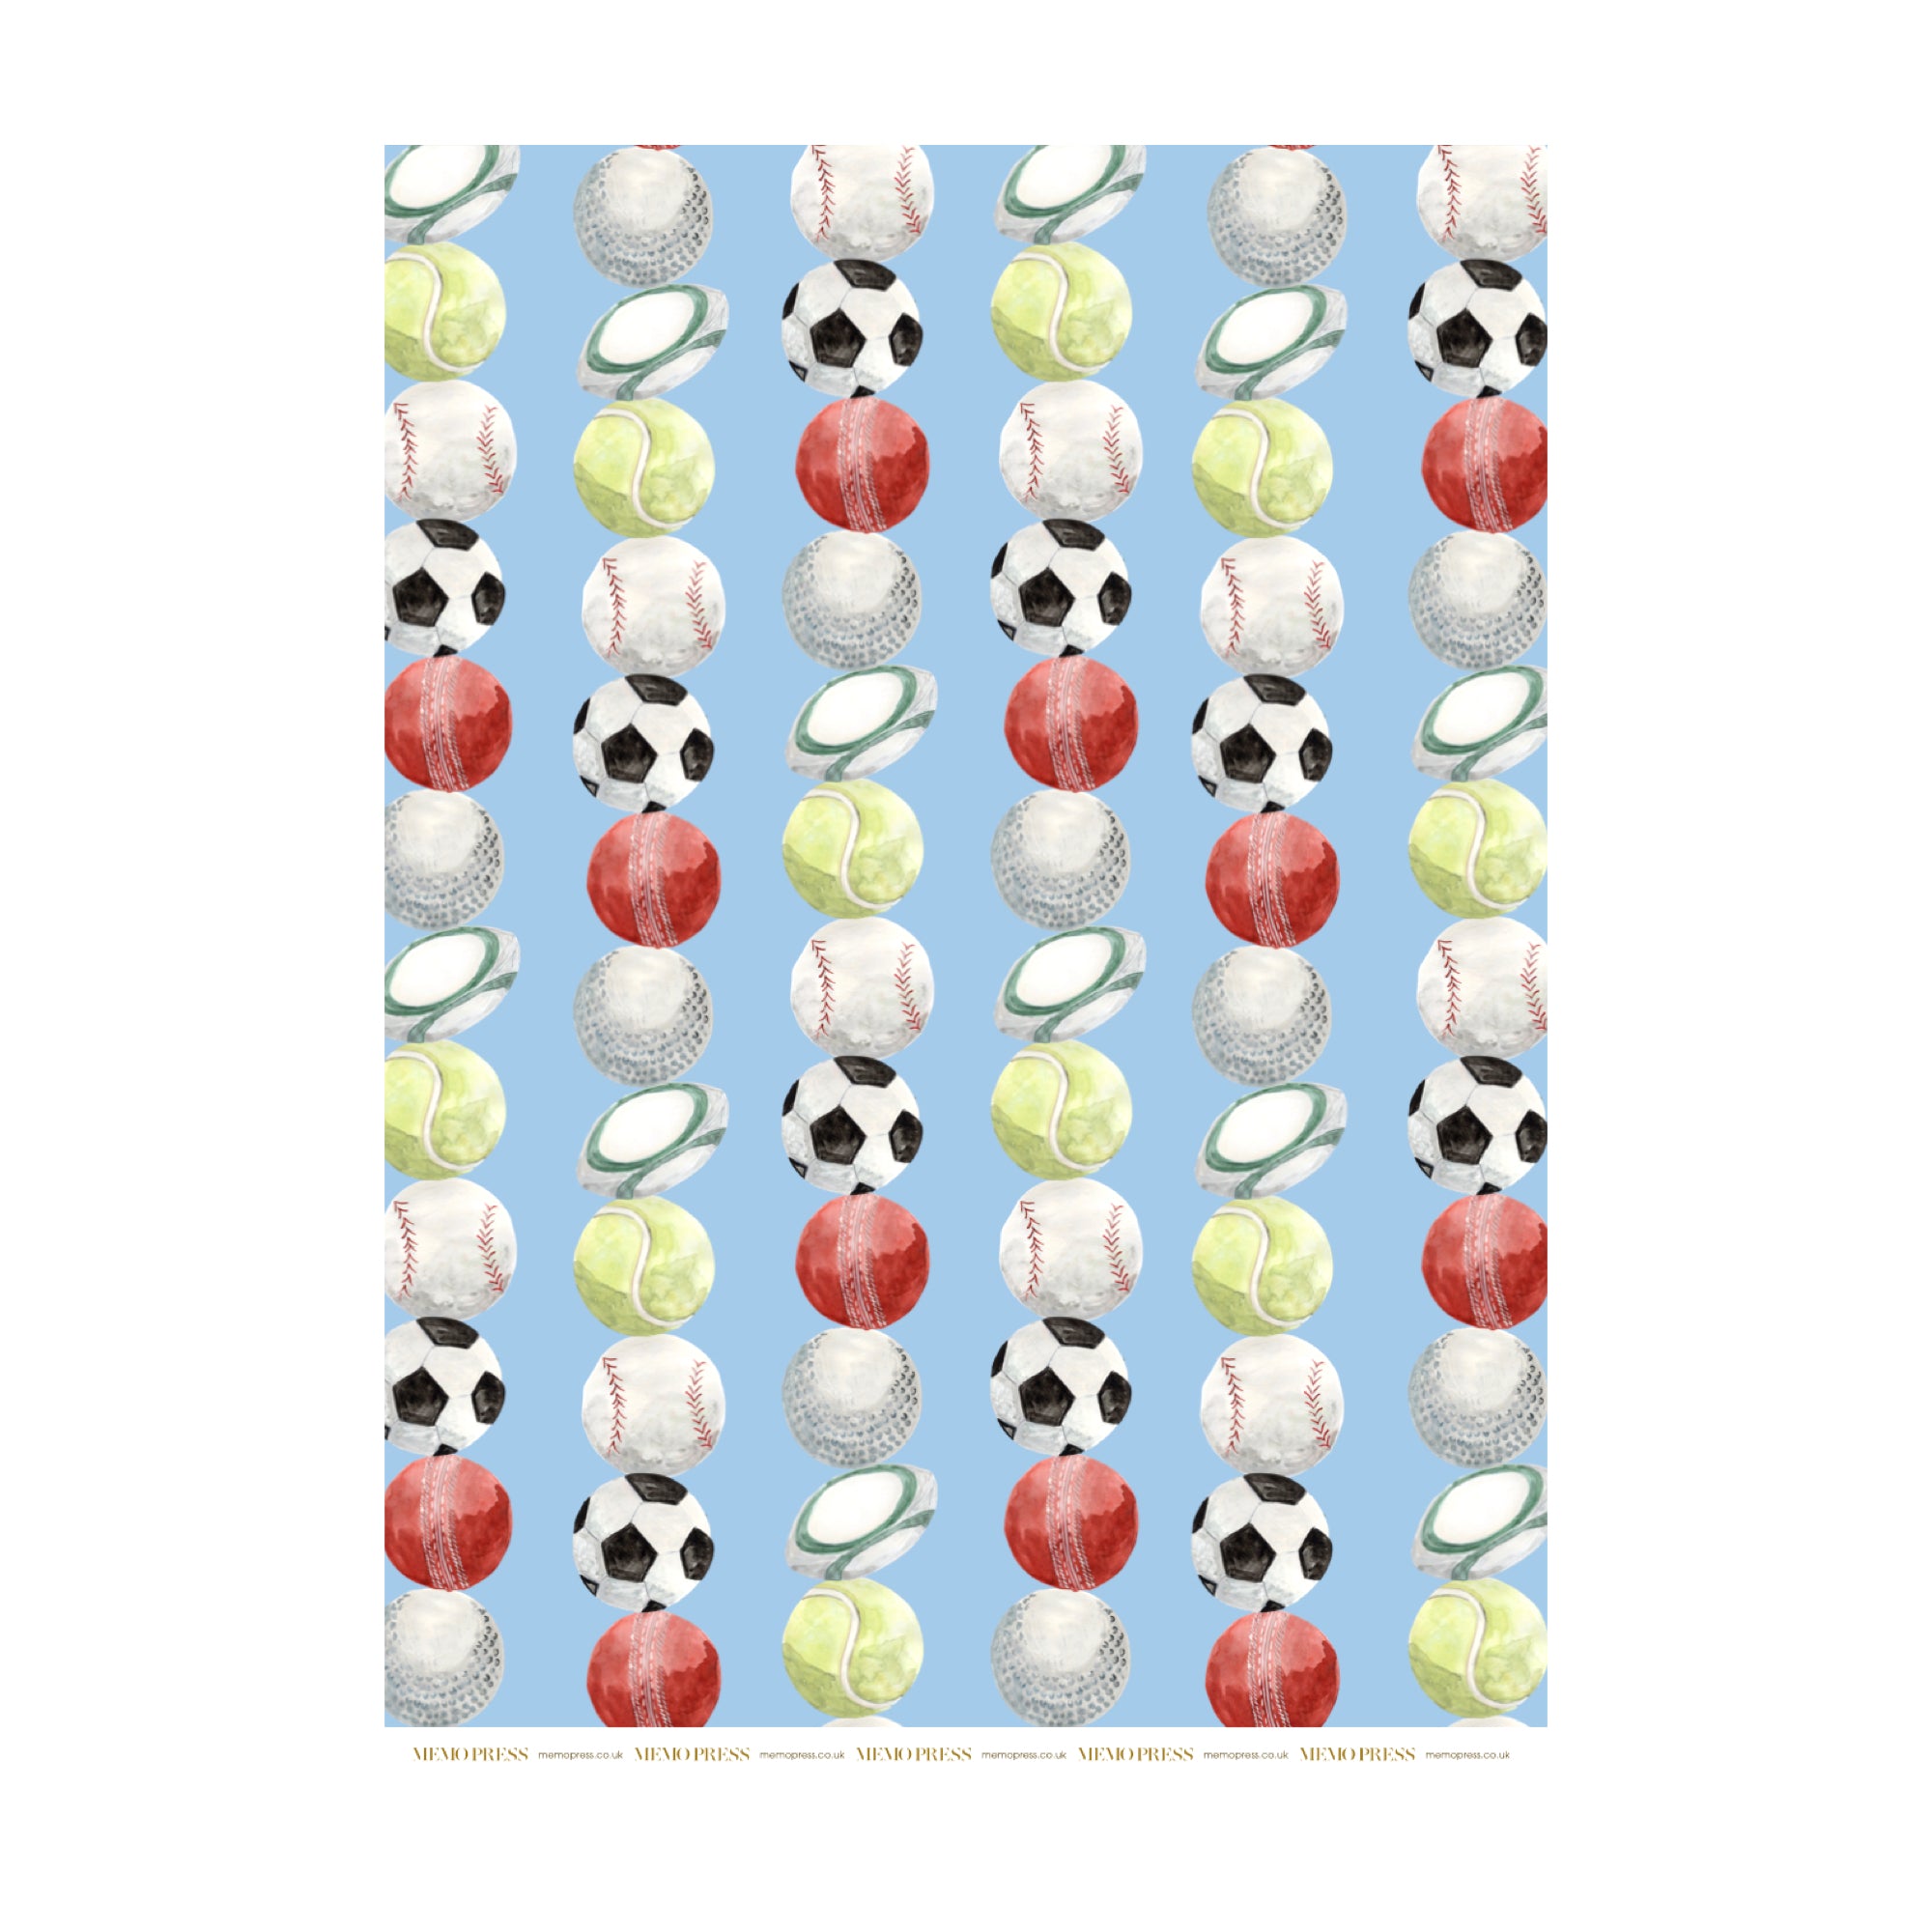 Wrapping paper with lots of kinds of sports balls illustrated on a blue background by Memo Press